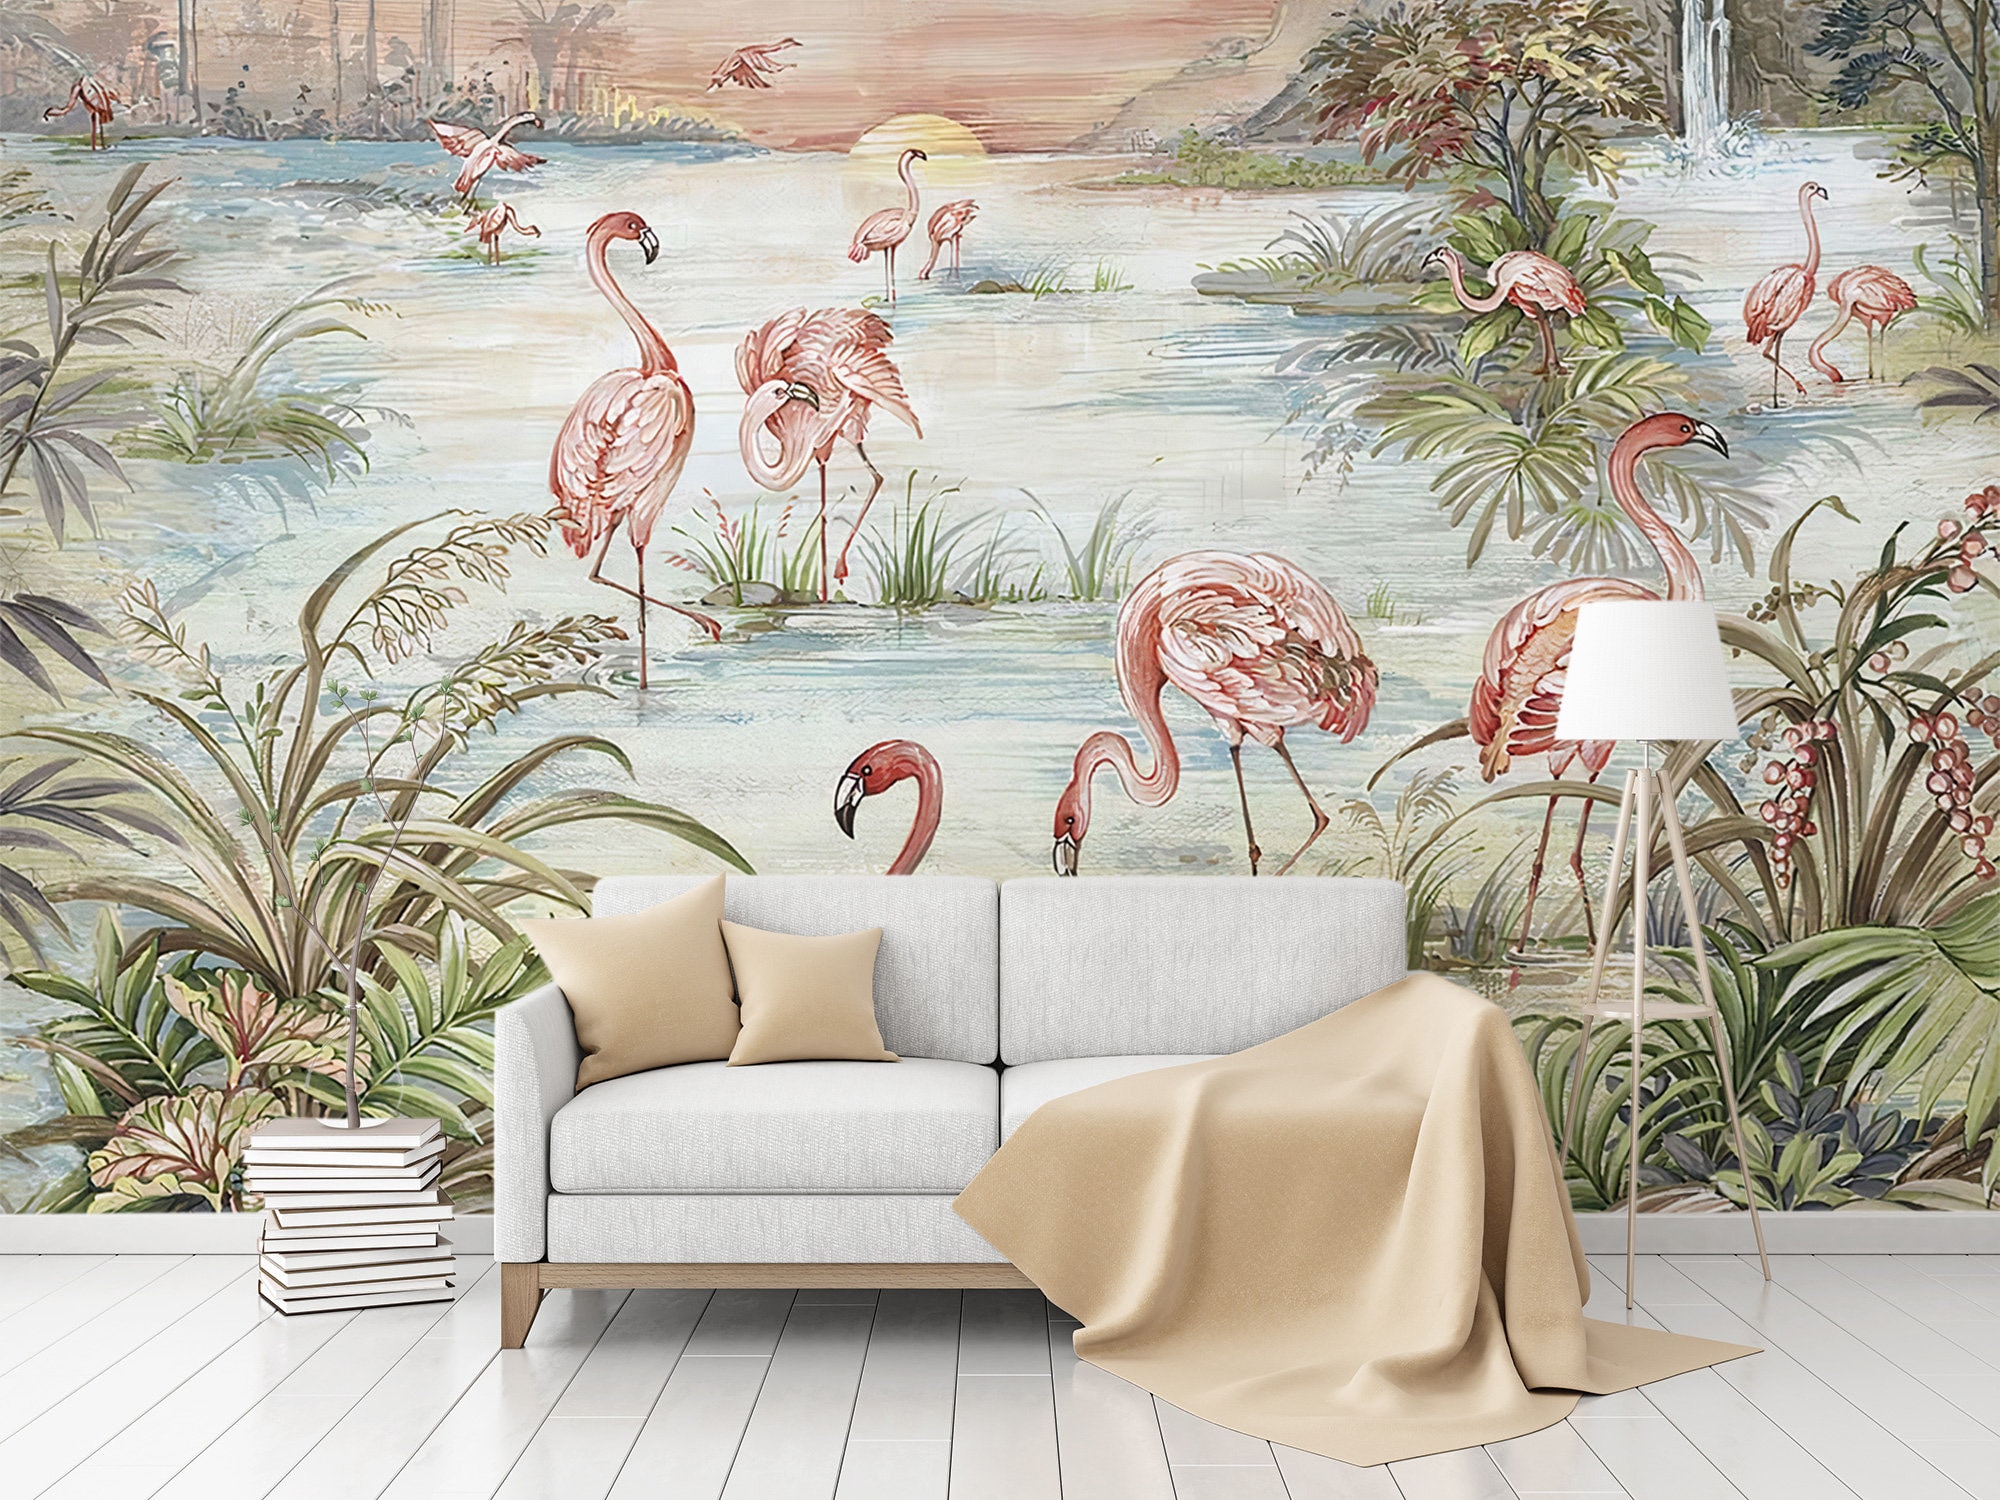 Buy Tropical Pink Flamingo  Monstera Leafs Pattern NonPVC SelfAdhesive  Peel  Stick Vinyl Wallpaper Roll Online in India at Best Price  Modern  WallPaper  Wall Arts  Home Decor 